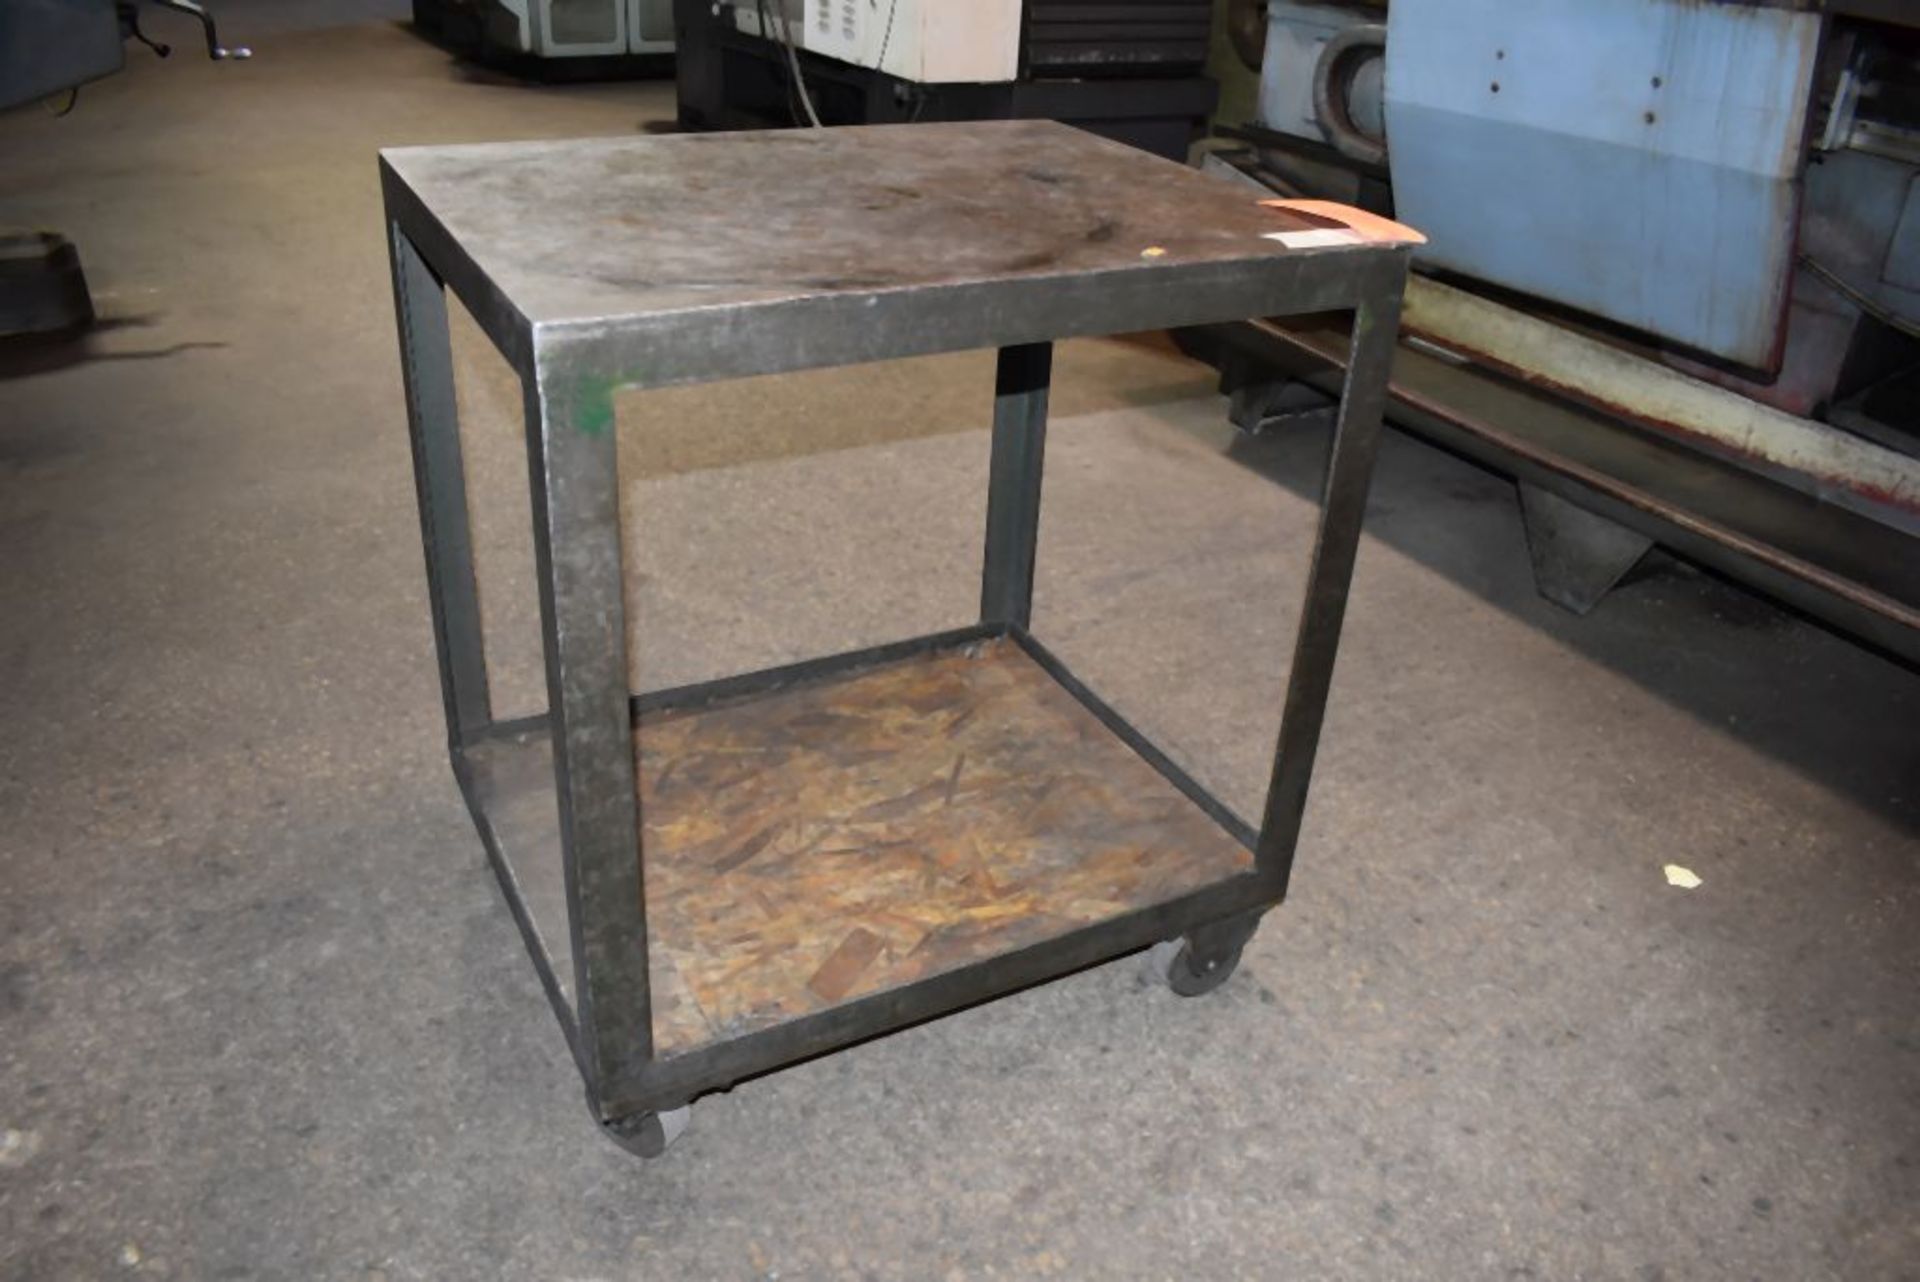 STEEL TWO TIER ROLLING SHOP TABLE, 30"L x 24"D x 33"H, NO CONTENTS